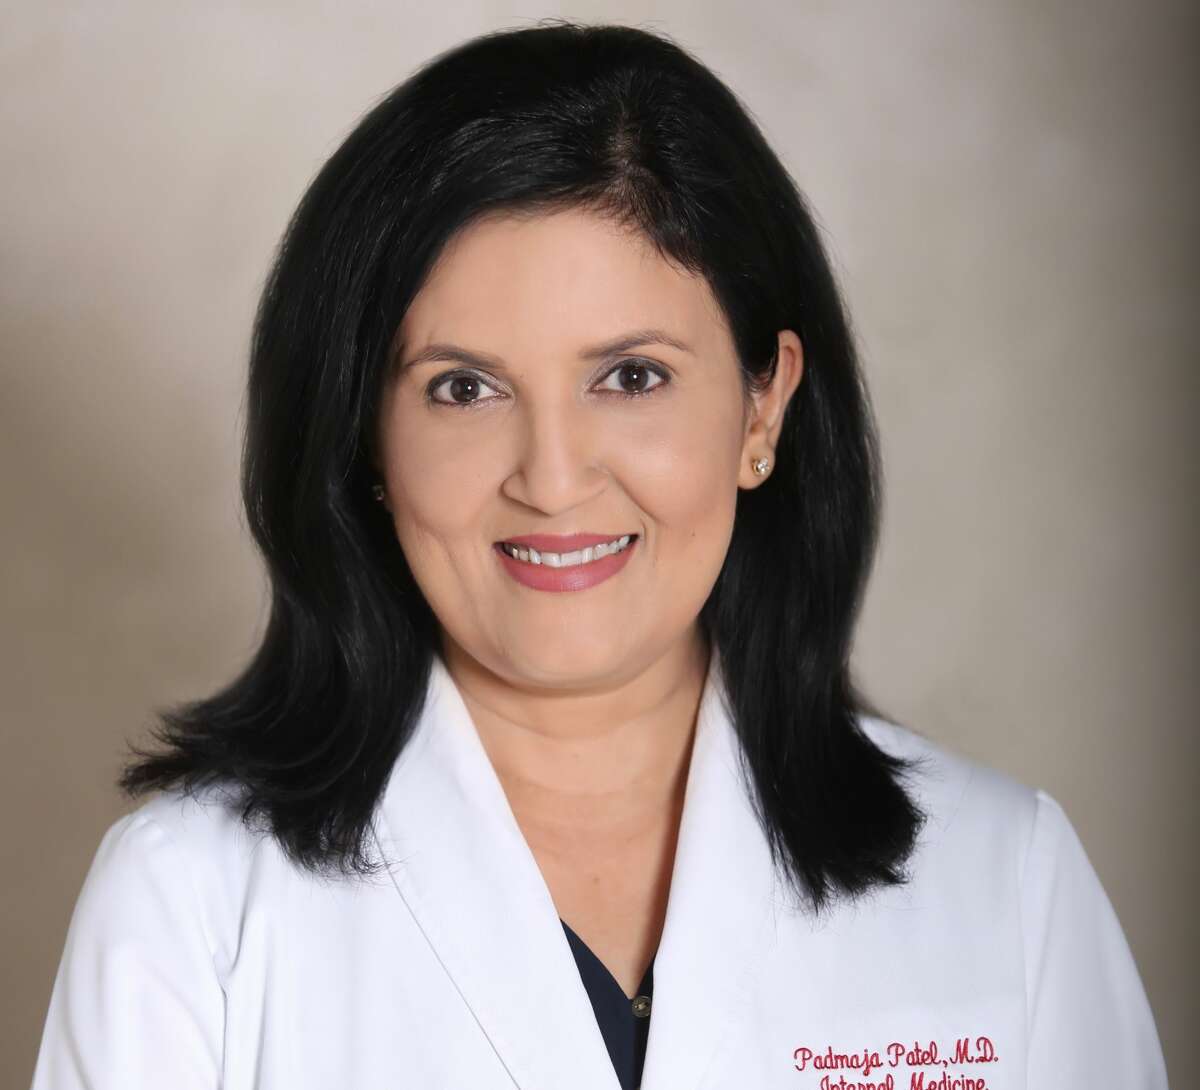 Dr. Padmaja Patel is the director of the Lifestyle Medicine Center.